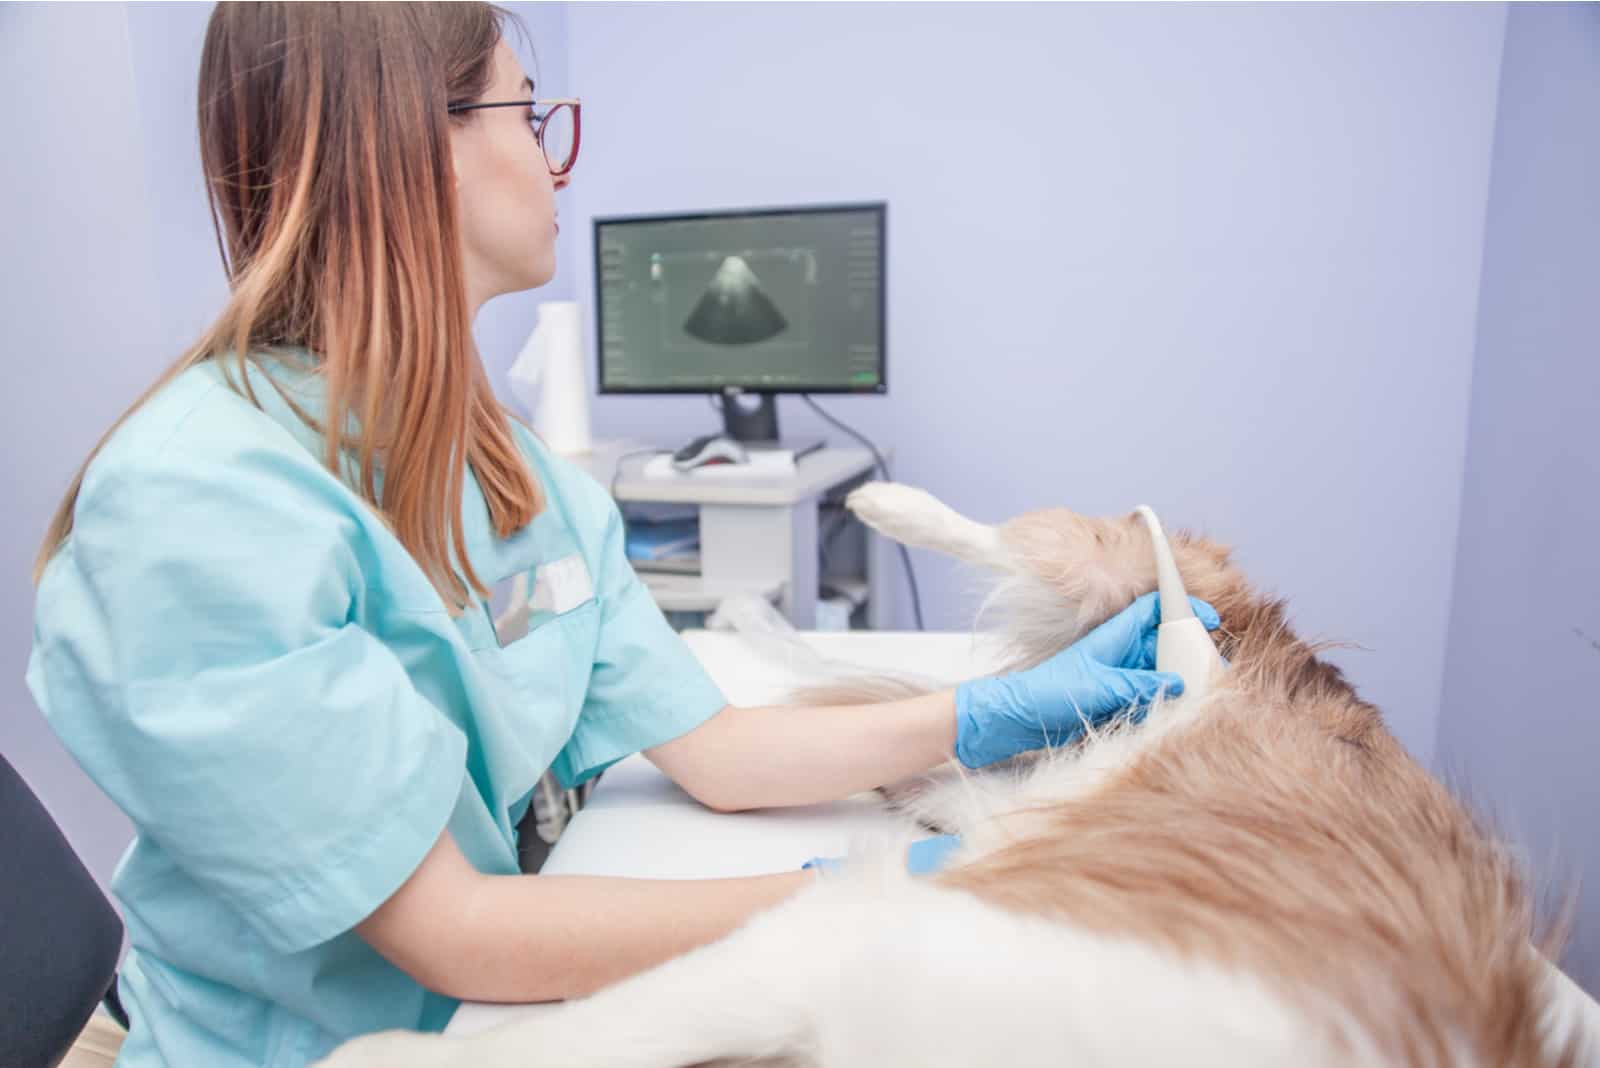 the vet does an ultrasound examination of the dog